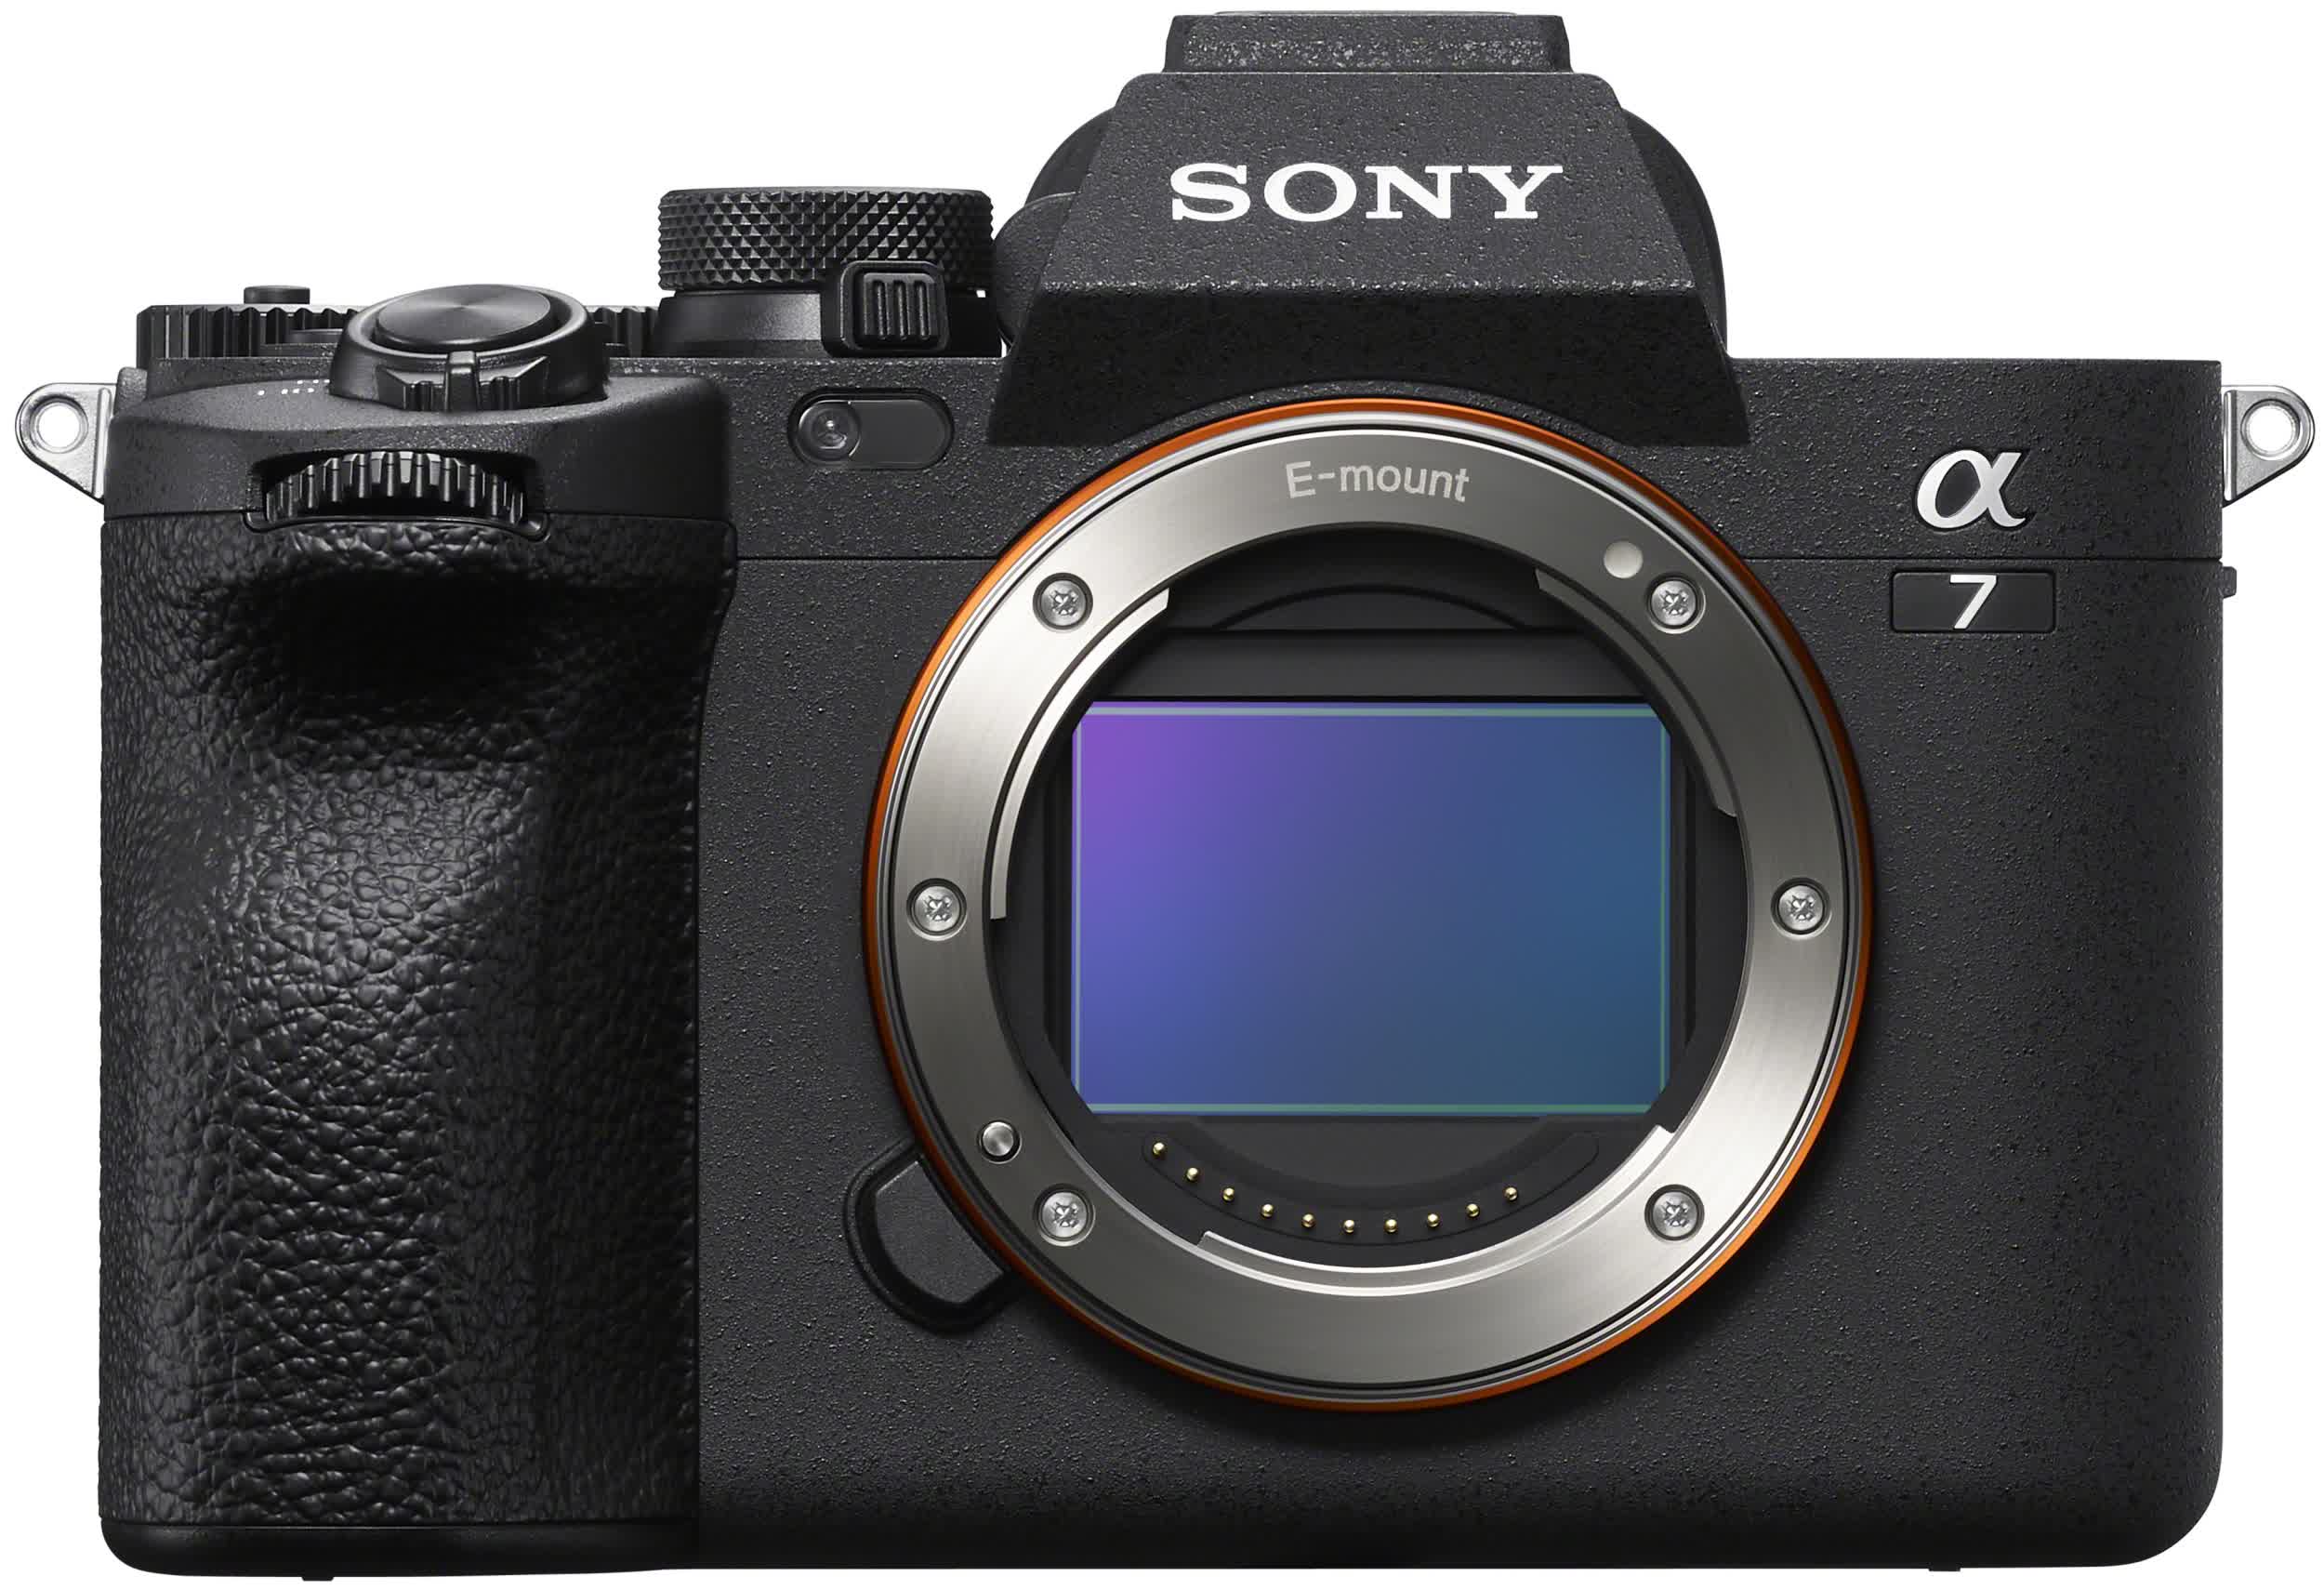 Sony unveils the A7 IV full-frame mirrorless camera with 33-megapixel sensor and 4K 60p video